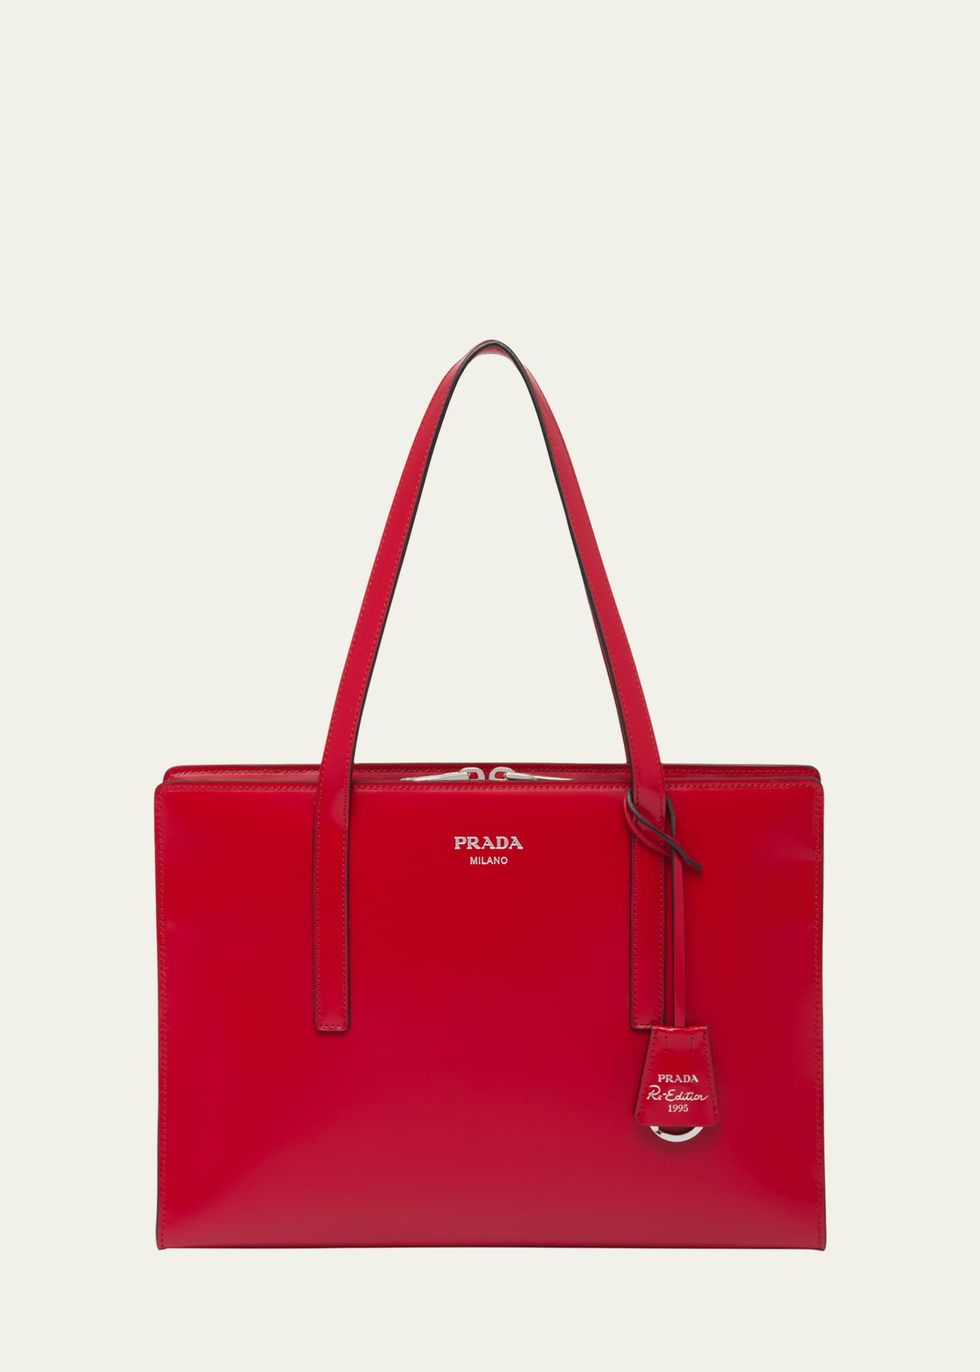 Check out the top spring 2023 handbag trends